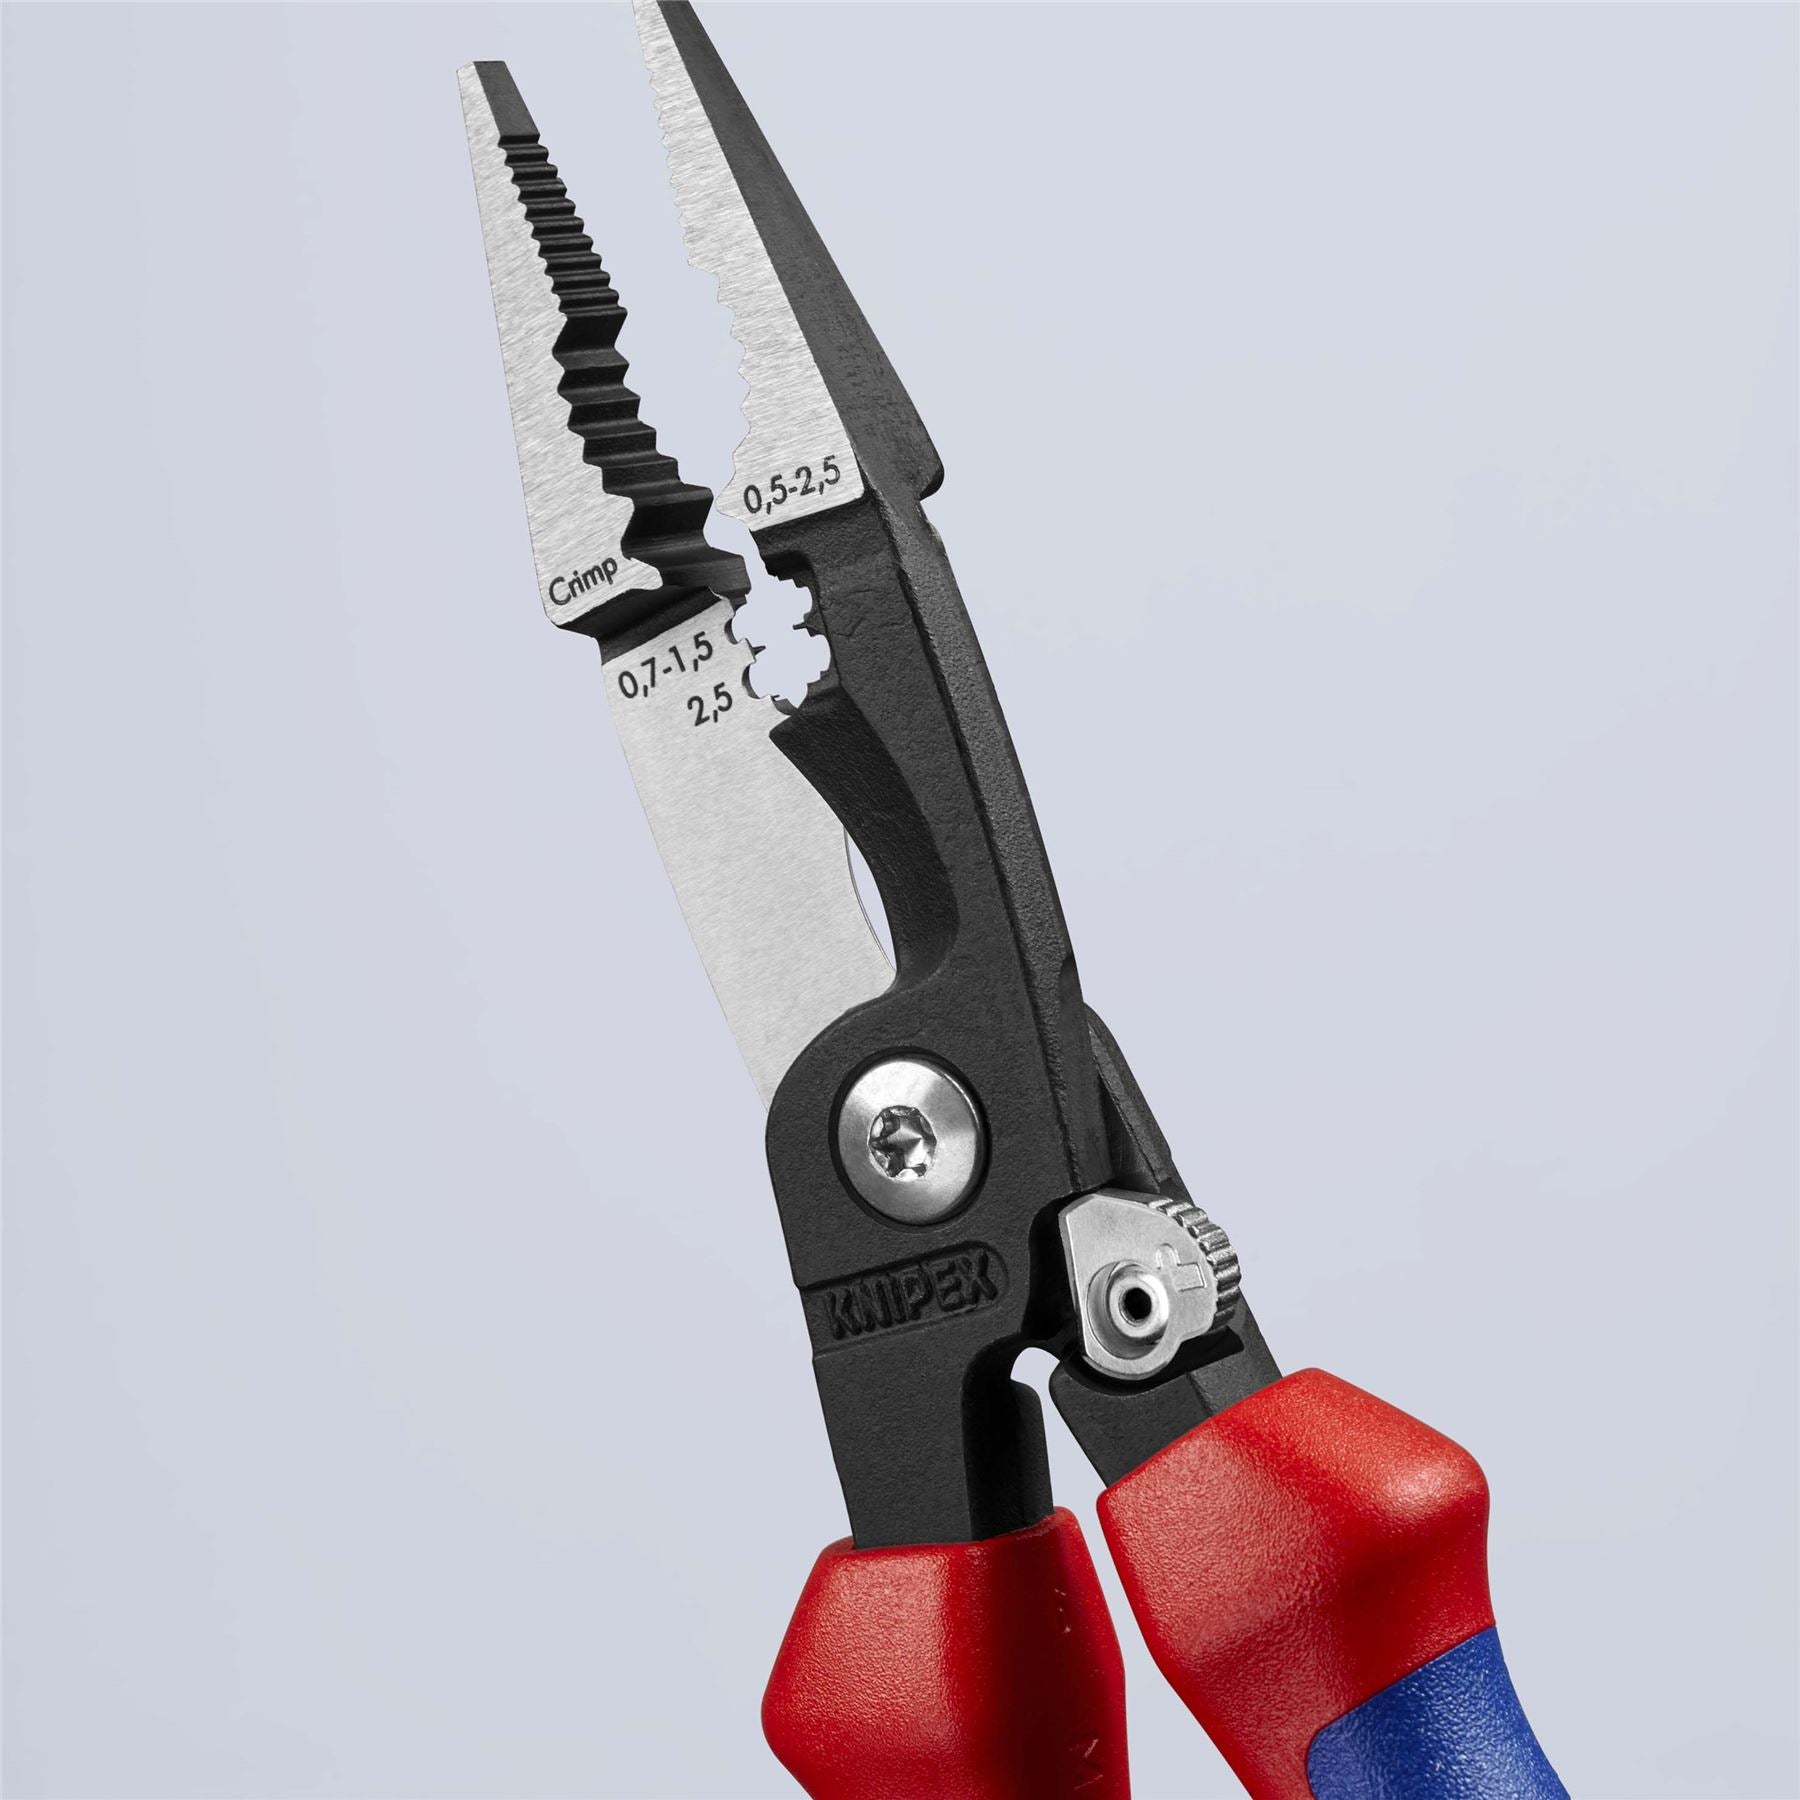 KNIPEX 1382200 - ELECTRICAL INSTALLATION PLIERS - 200MM CUTTING EDGES STEEL  GRIP